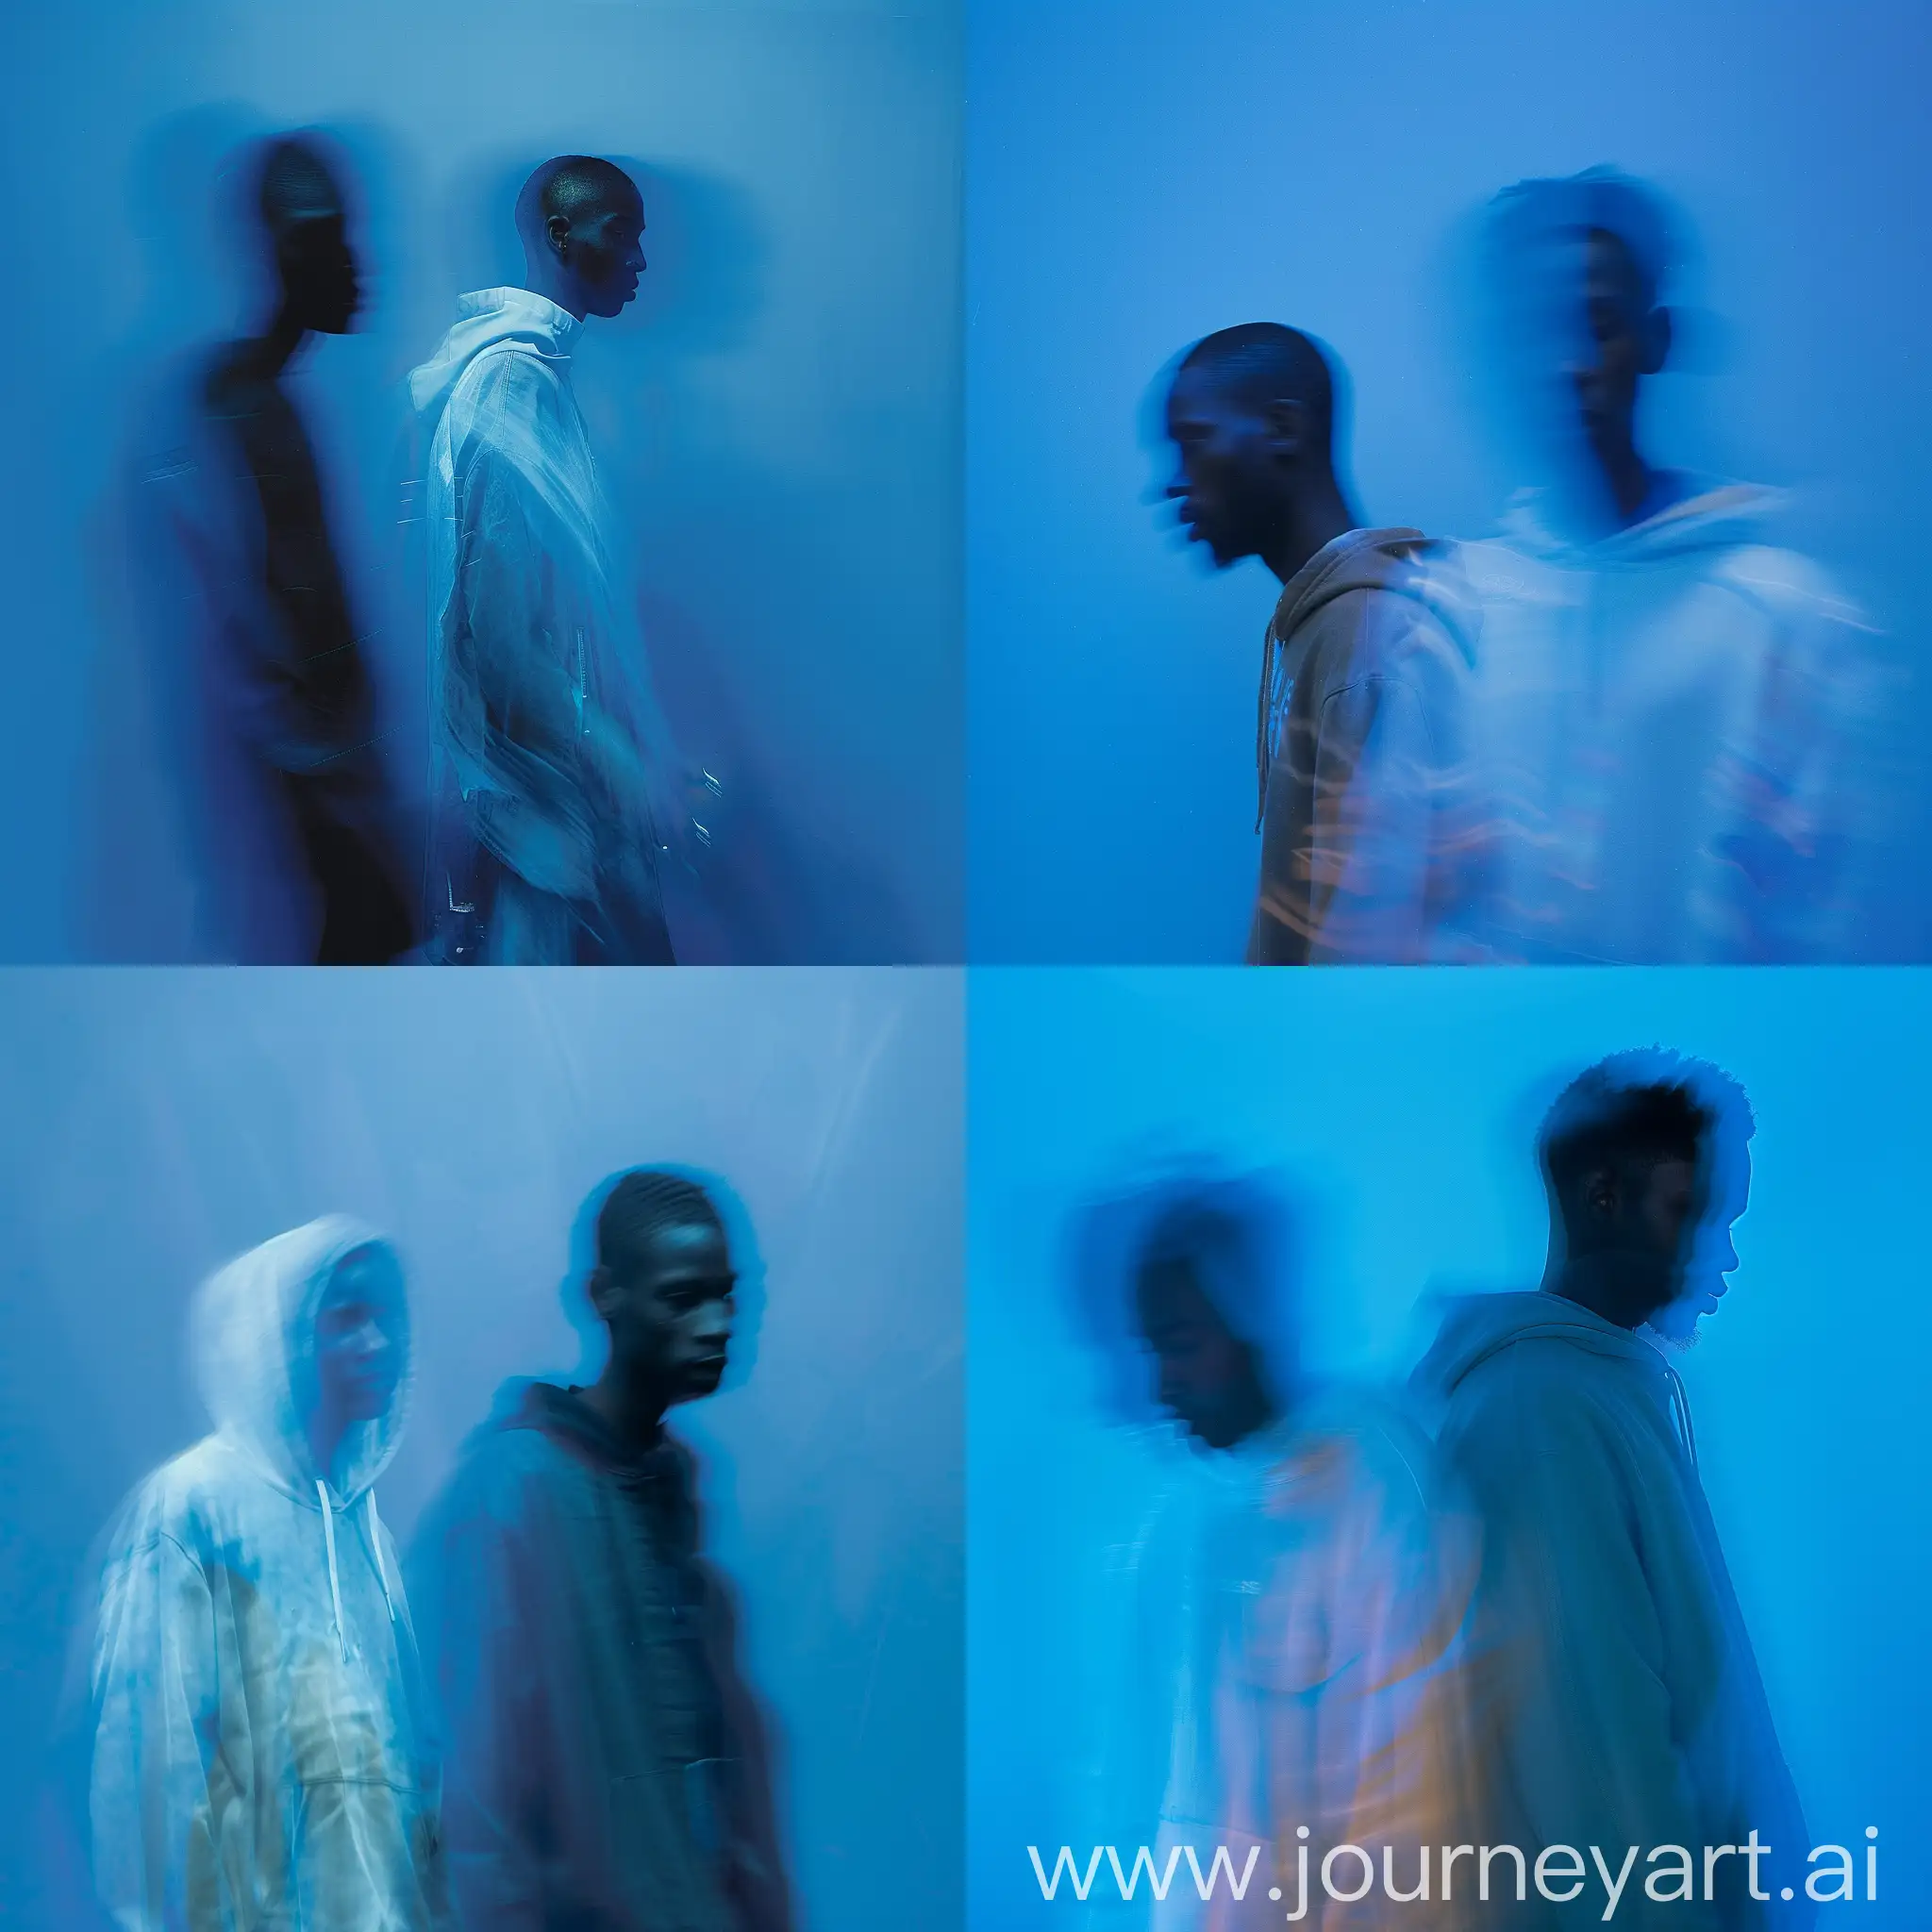 Create image image, two blurred black men figures are depicted against a blue background. The motion blur creates a ghostly, ethereal effect, with facial features and clothing details obscured. One figure in the foreground appears to be wearing a hoody in a light color, contrasting with the second figure, which is in a darker outfit. The lighting and blur lend a mysterious, almost haunting quality to the scene. Many acid colors 